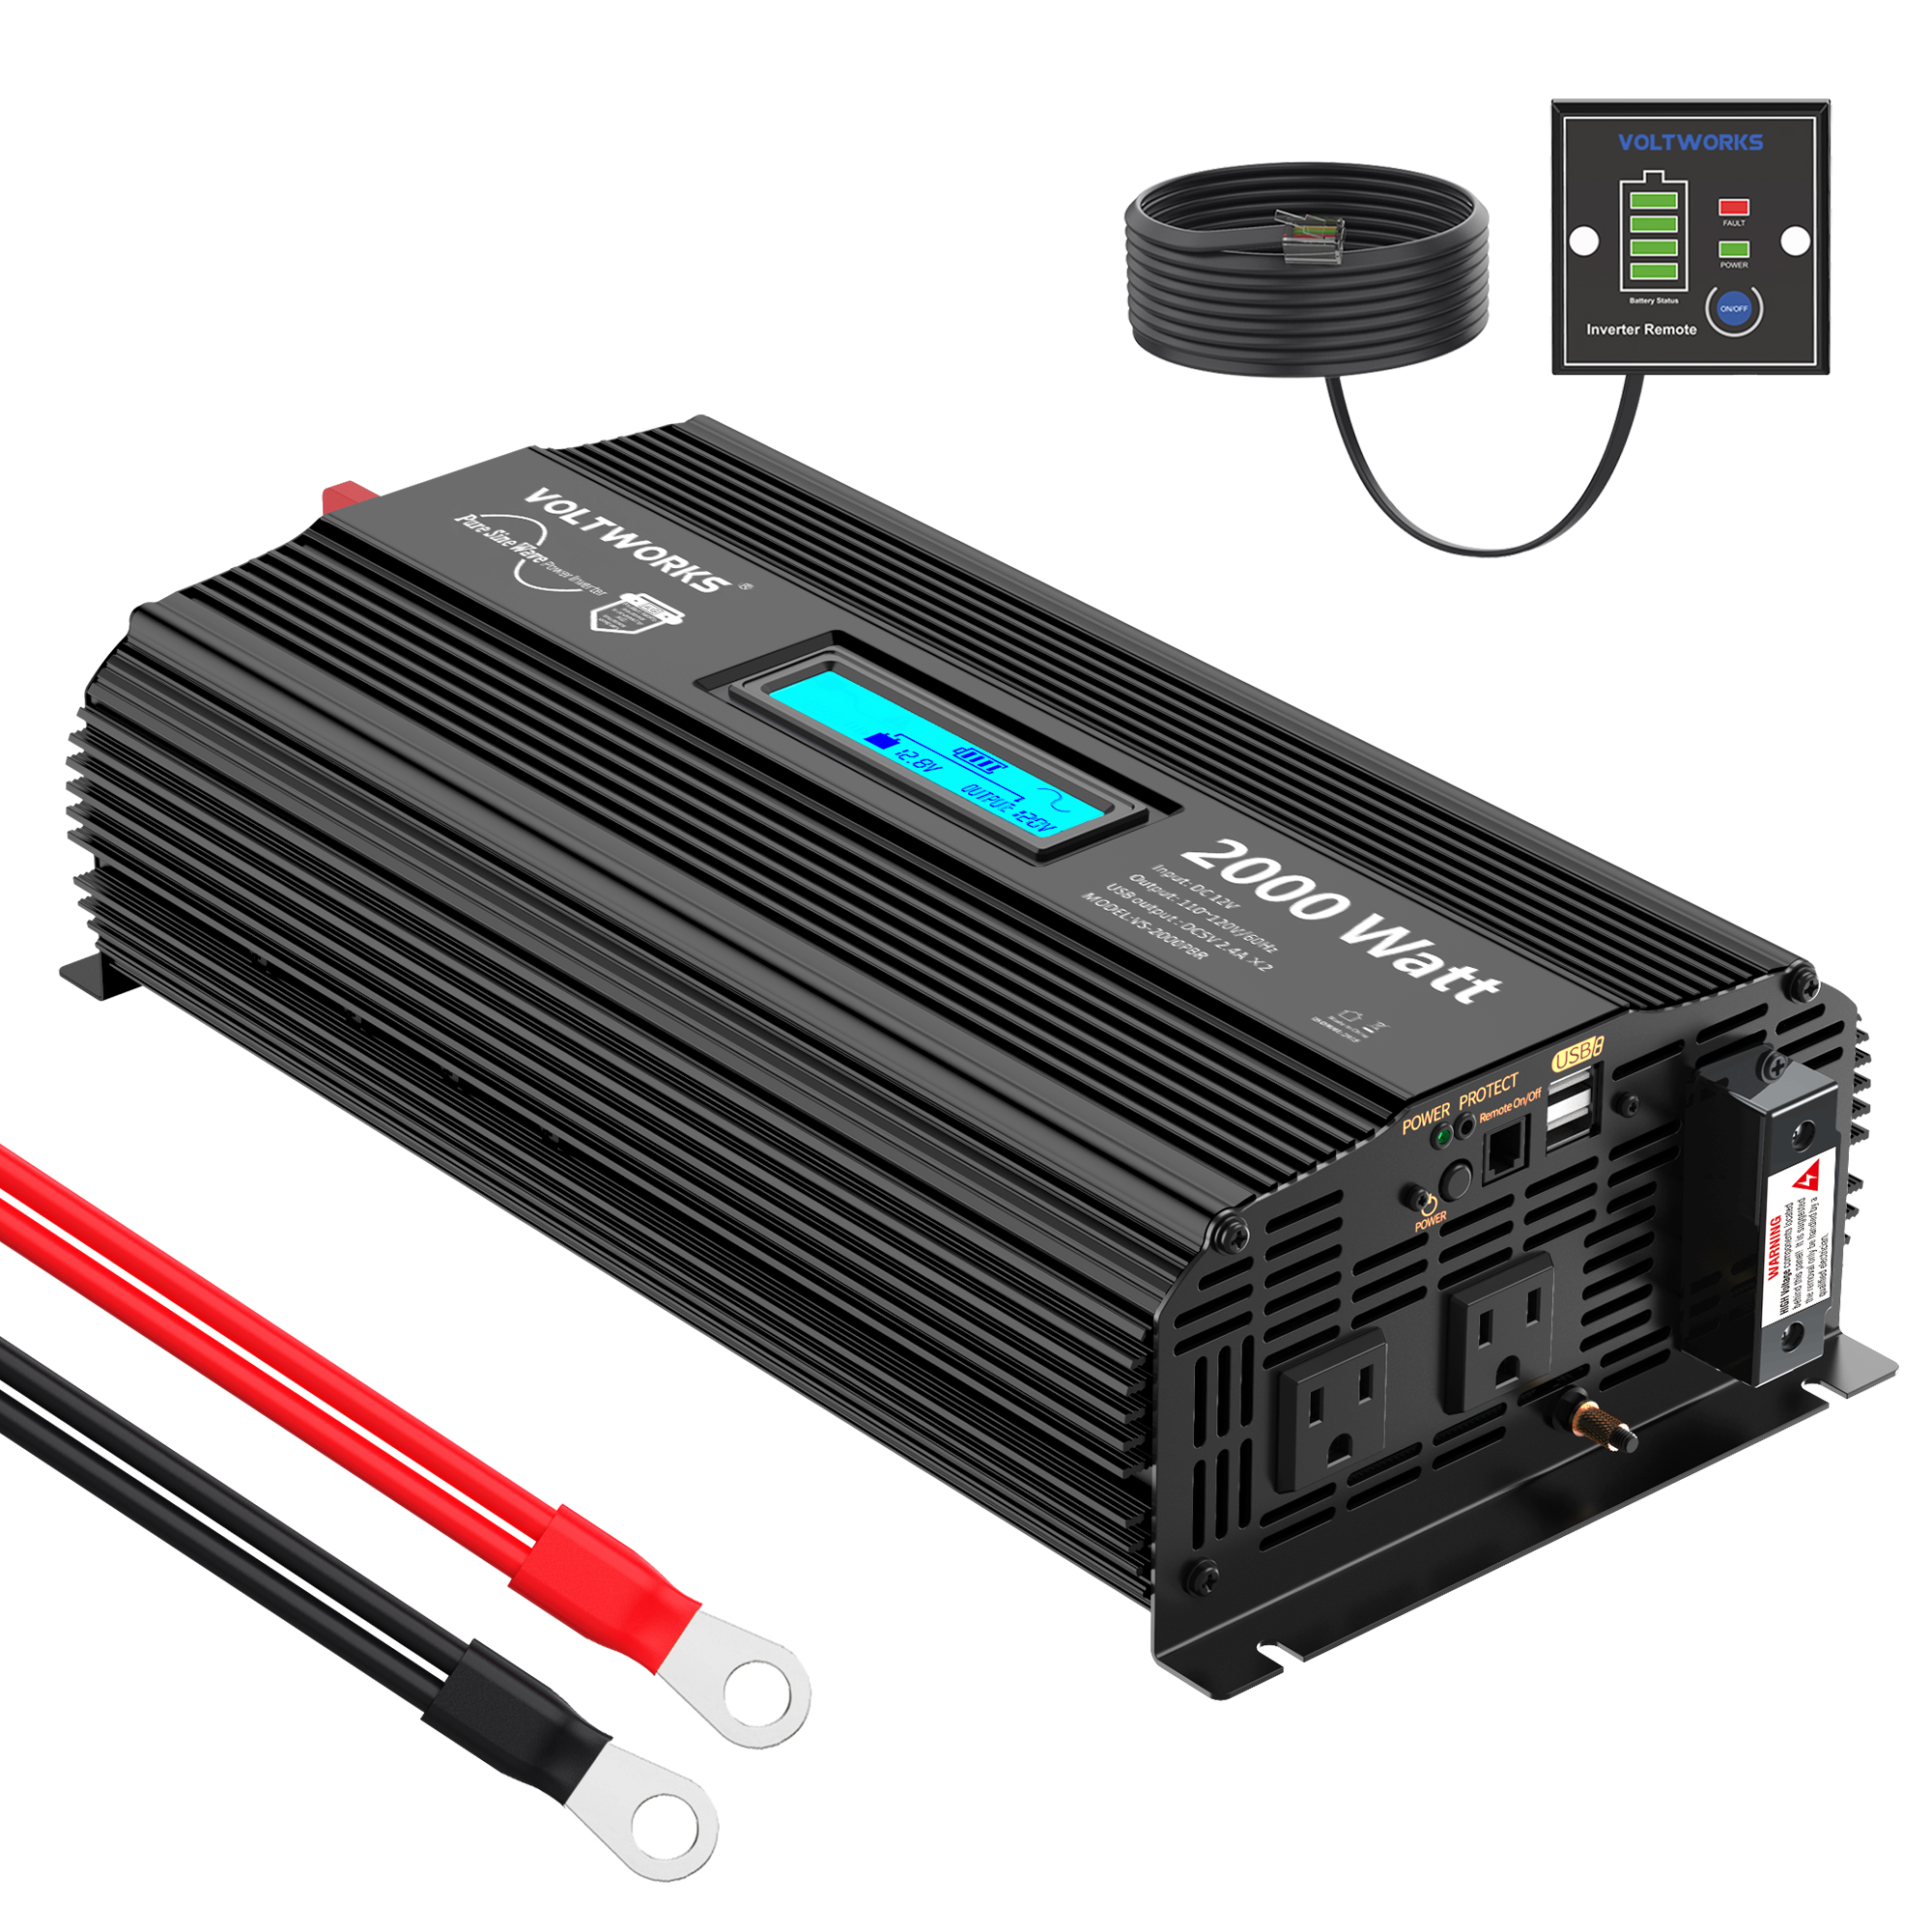 Pure Sine Wave Power Inverter 2000Watt Car Converter DC 12V to 120V AC with 2 AC Outlets 2x2.4A USB Ports Remote Control and LCD Display by VOLTWORKS